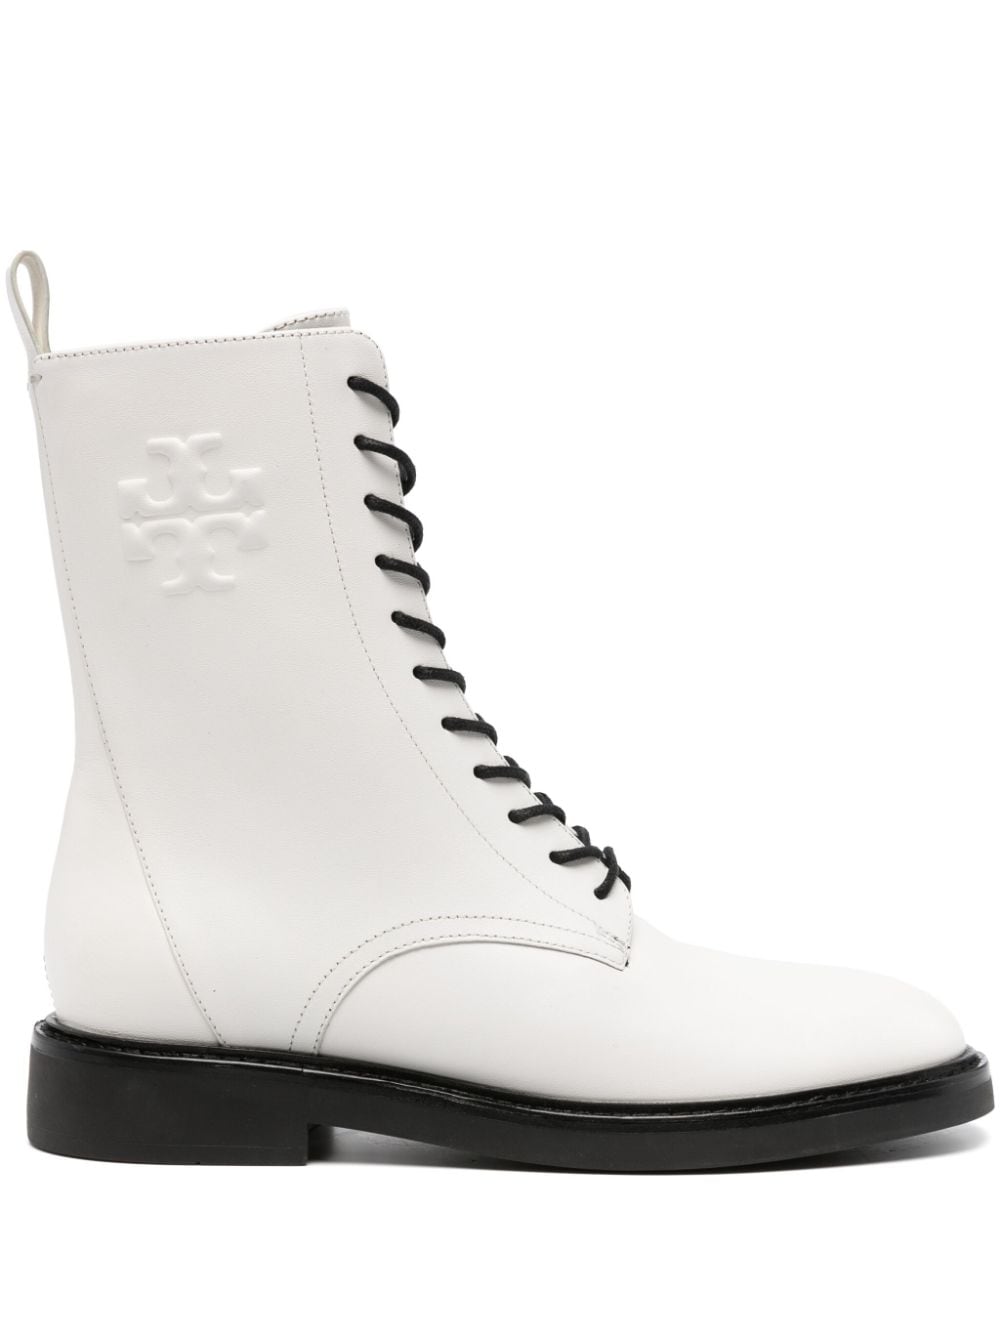 Tory Burch Double T-embossed leather boots - White von Tory Burch